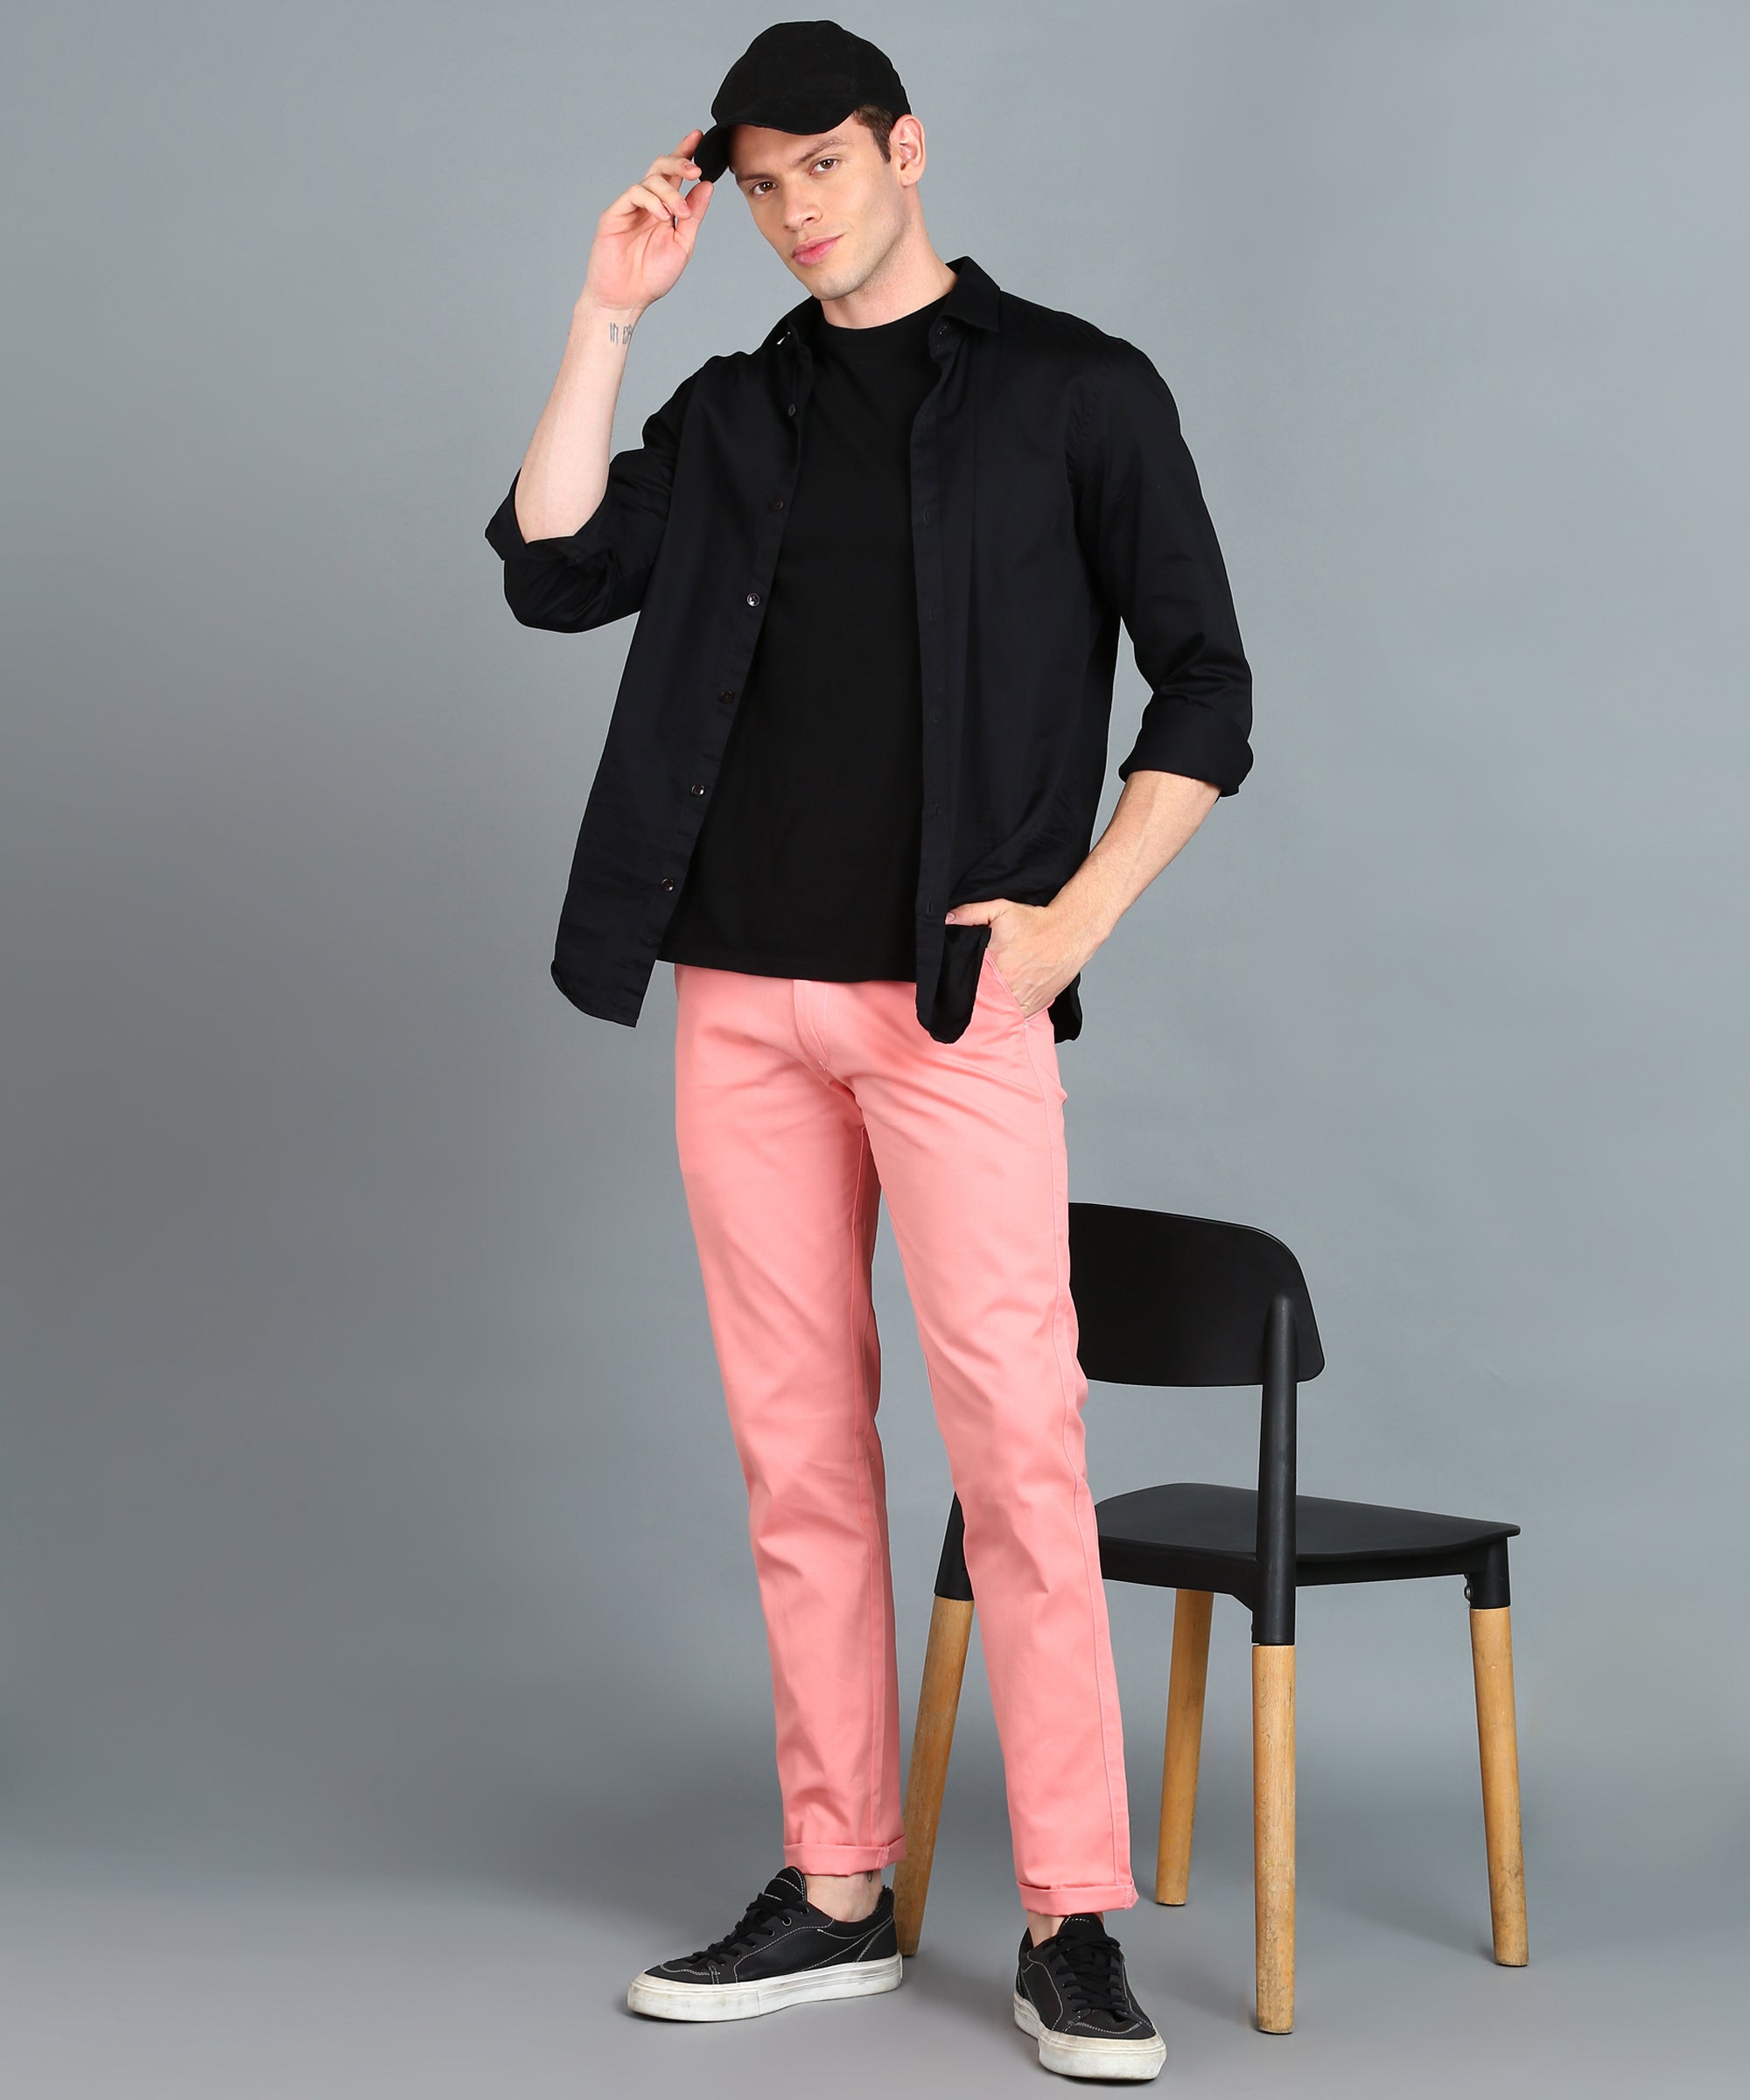 Men's Pink Cotton Light Weight Non-Stretch Slim Fit Casual Trousers